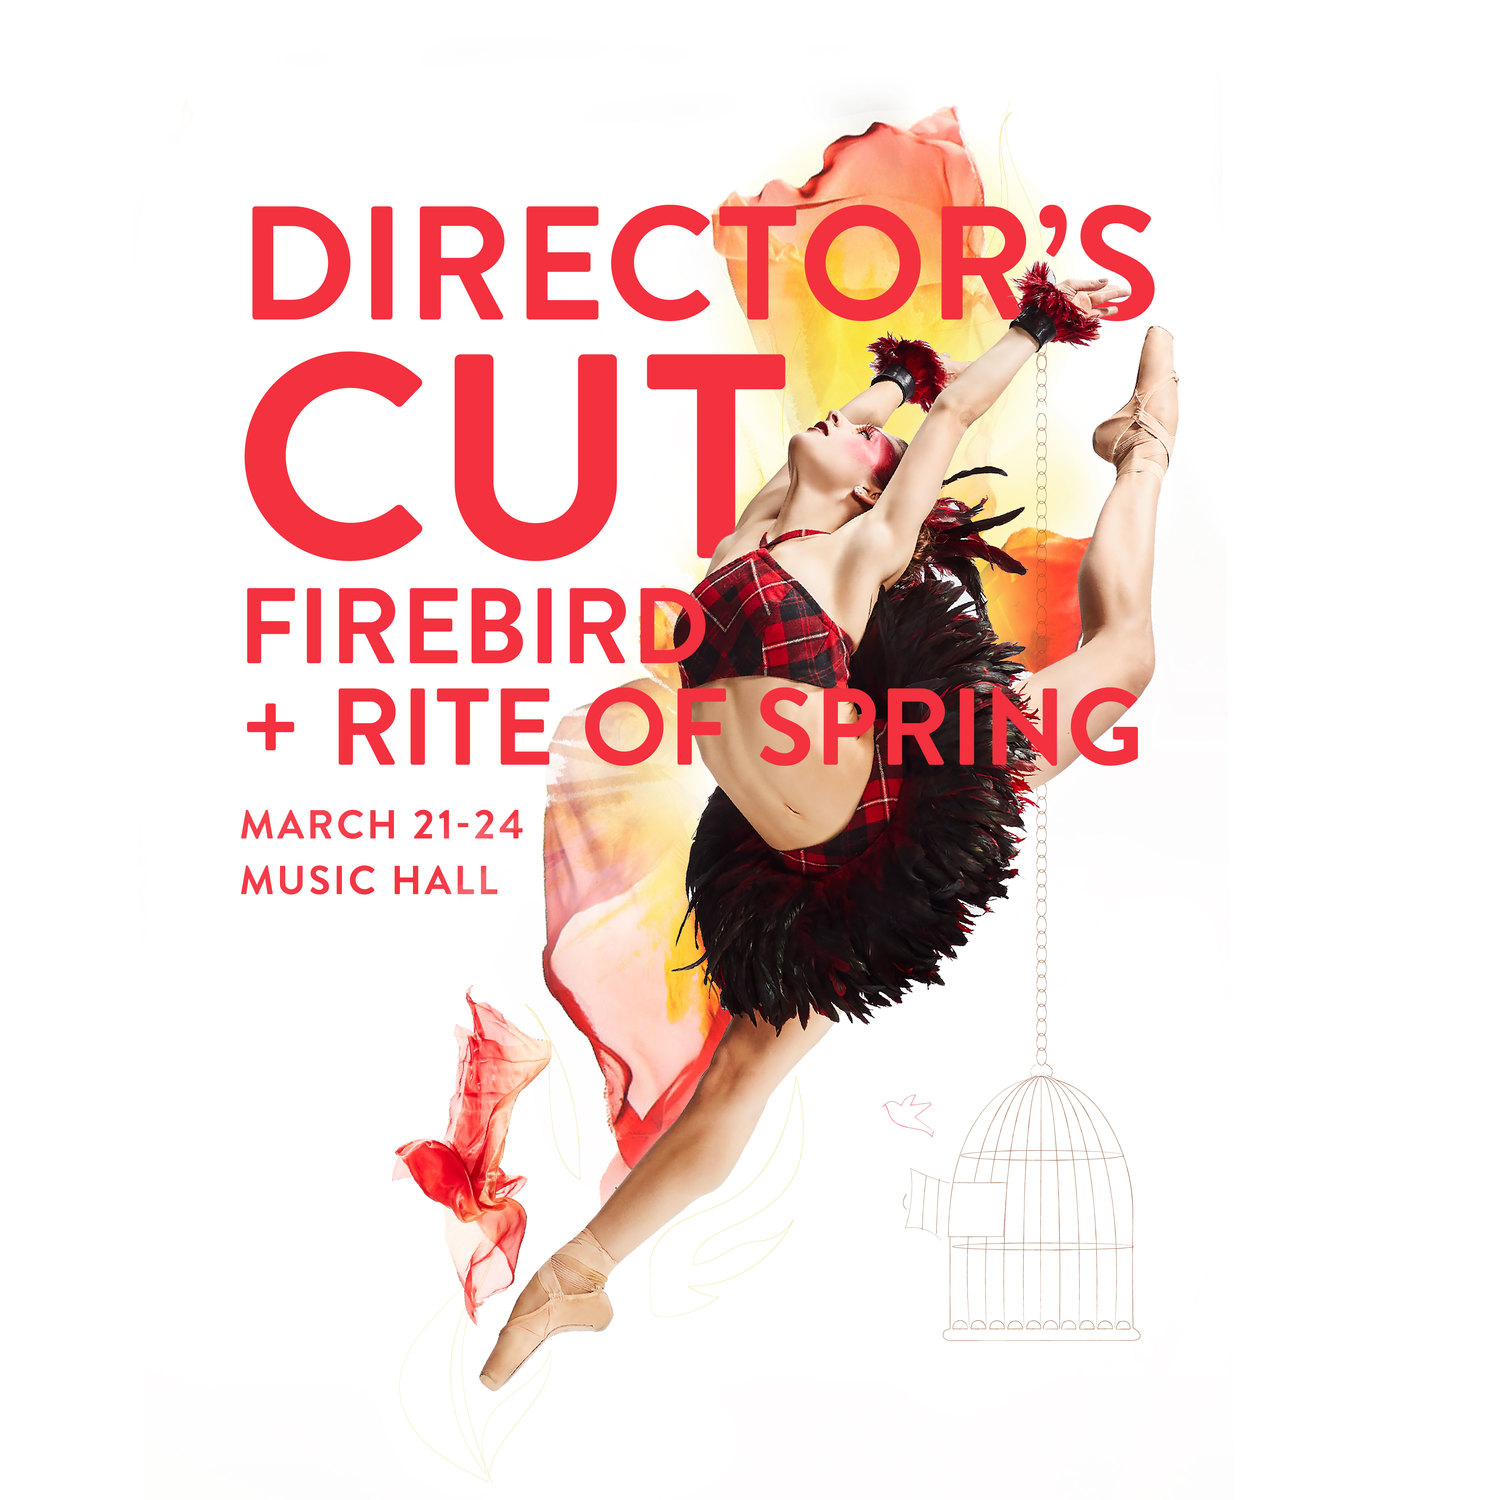 Where classic meets contemporary.
Experience the colossal blend of music and dance in this dazzling pair of works by Cincinnati favorite, Adam Hougland, both set to the music of the iconic Igor Stravinsky. The first is Rite of Spring, a ritualistically visceral tale that is breathtaking and tribal at the same time. The second is the intoxicating Firebird, Hougland’s unique take on the classic ballet about the intertwined lives of a hunter and a magical bird.